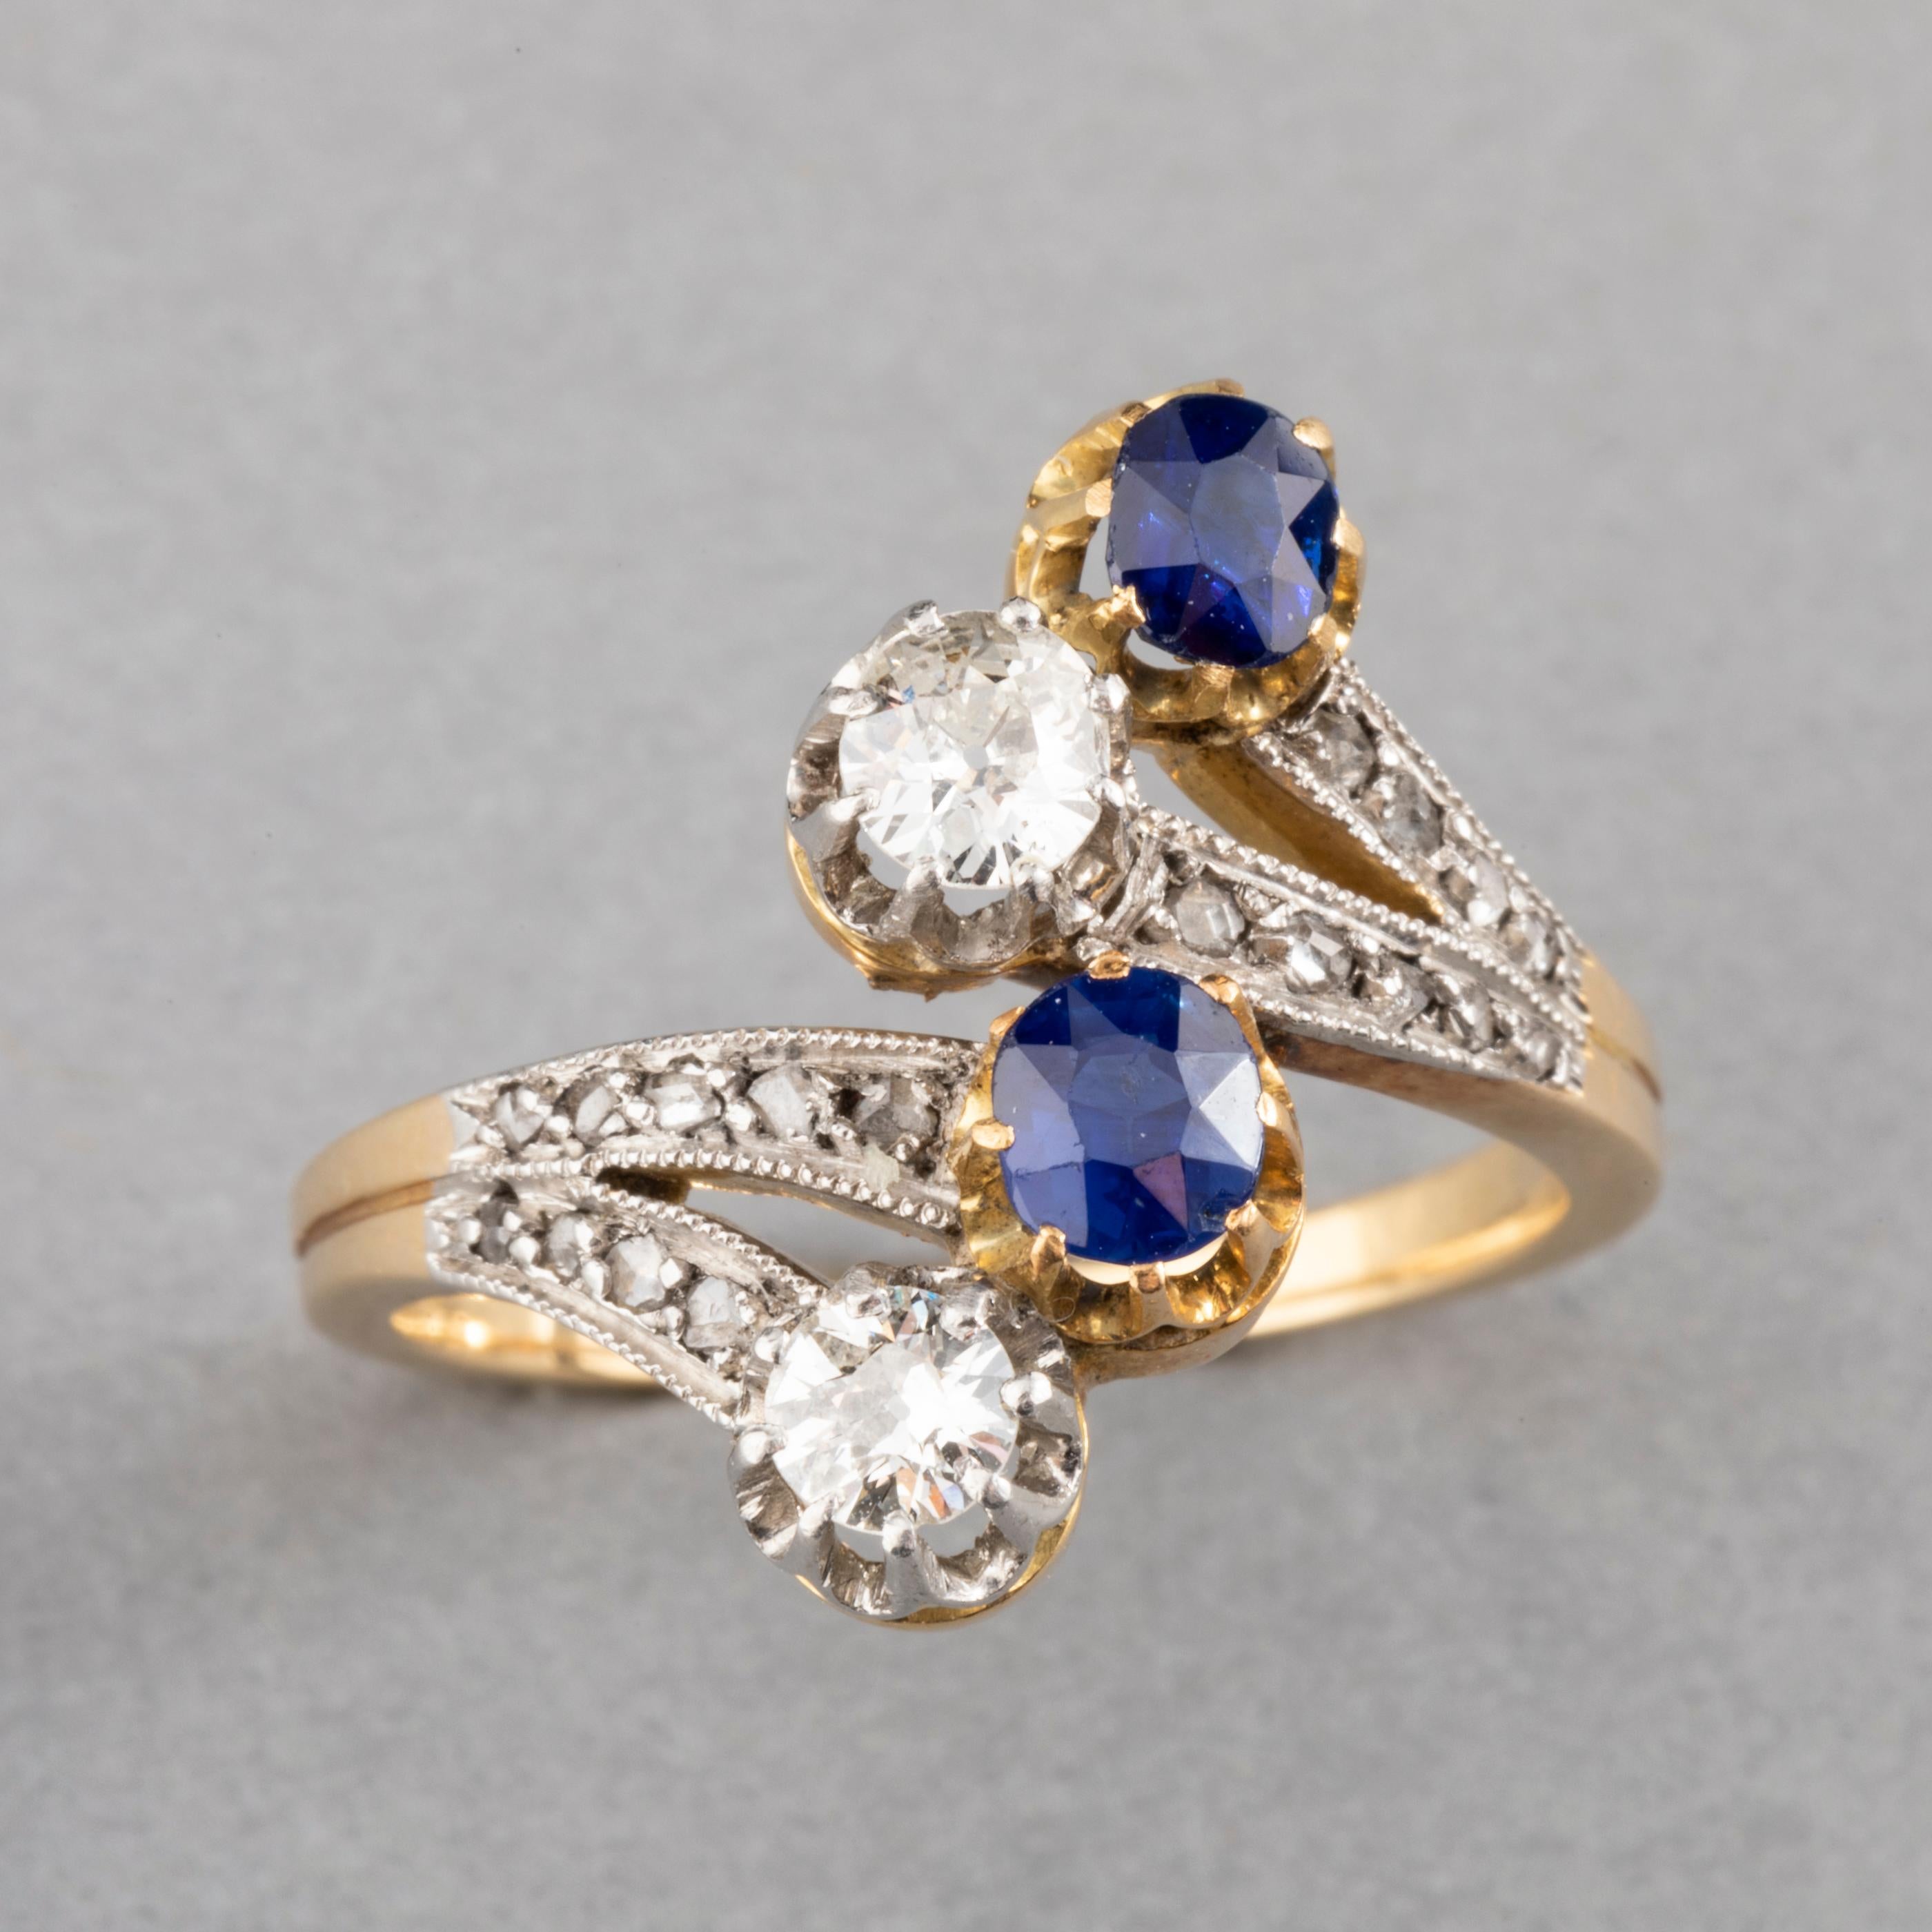 Antique  Gold Sapphires and Diamonds French Belle Epoque Ring

Beautiful antique ring, made in France circa 1910. Craft in yellow gold 18k (eagle head mark and mark of the maker, unknown).
The diamonds are good quality, round cut, they weight 0.25